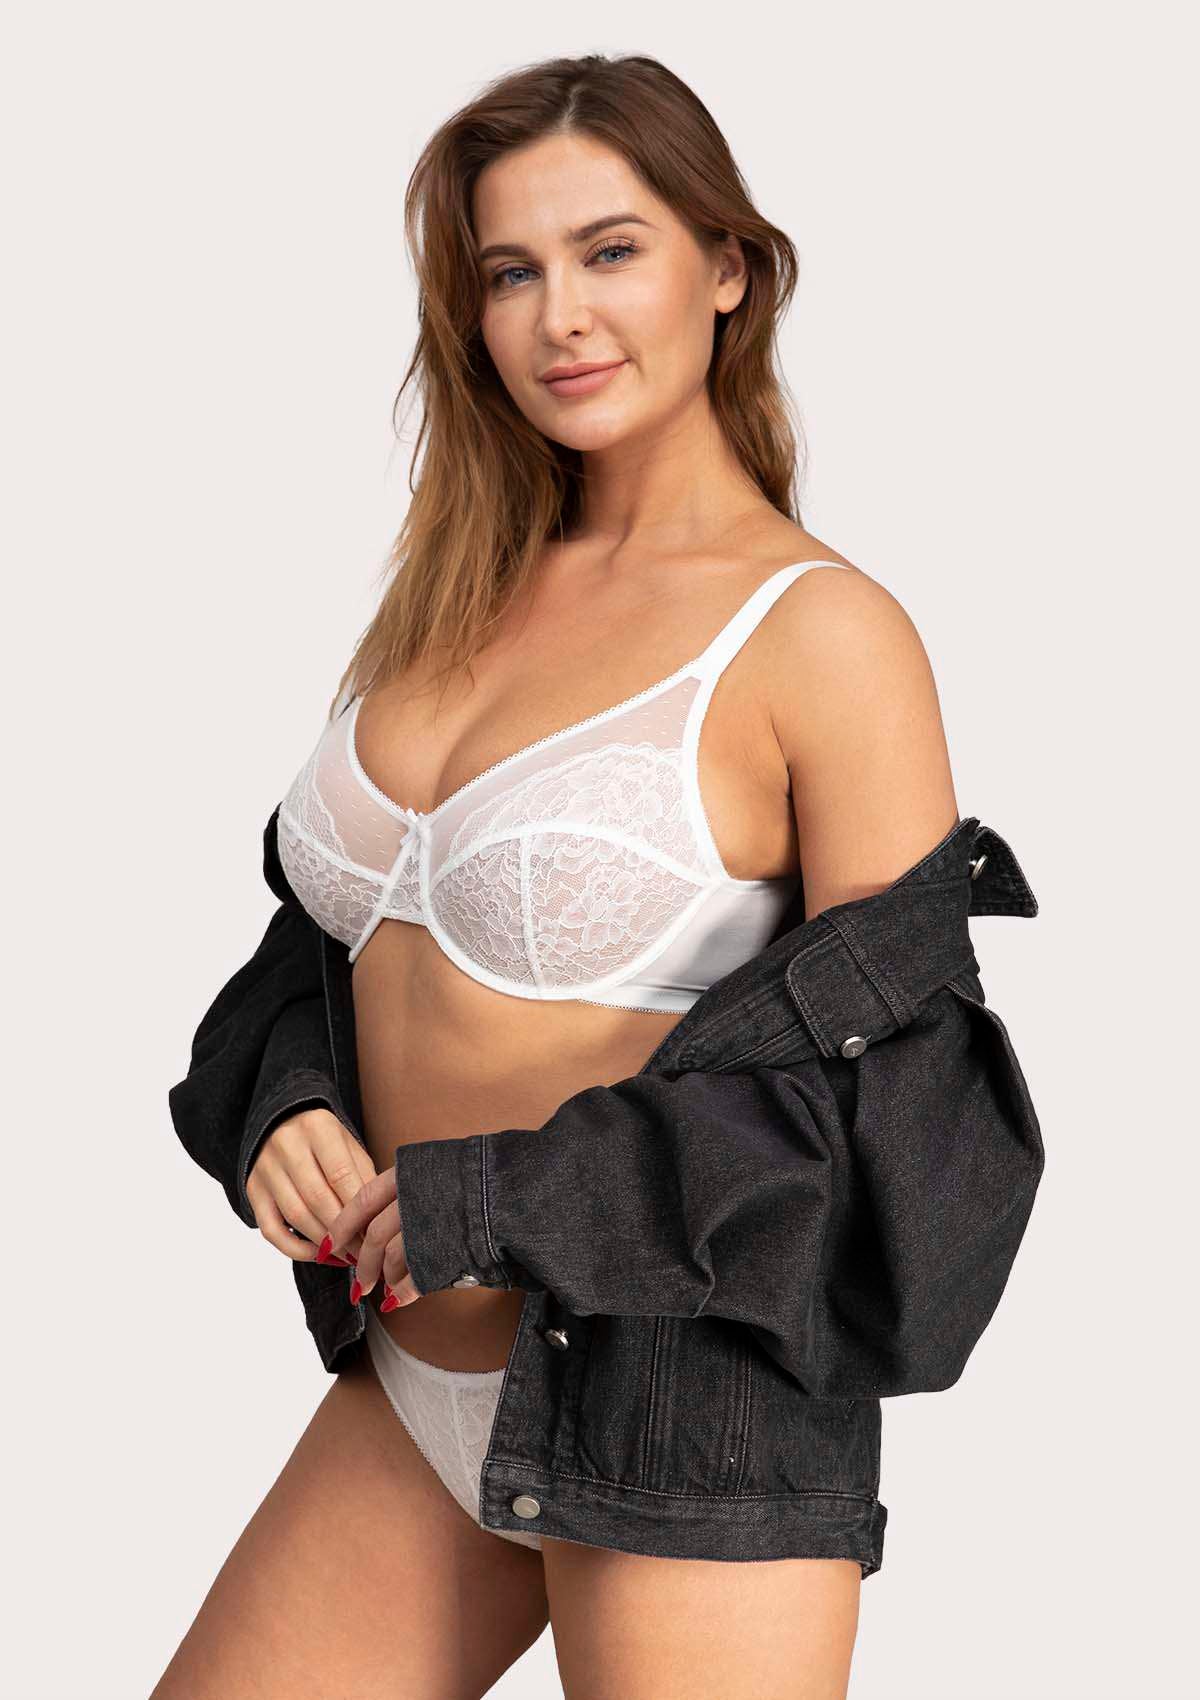 HSIA Enchante Lace Bra And Panties Set: Bra For Side And Back Fat - White / 40 / C